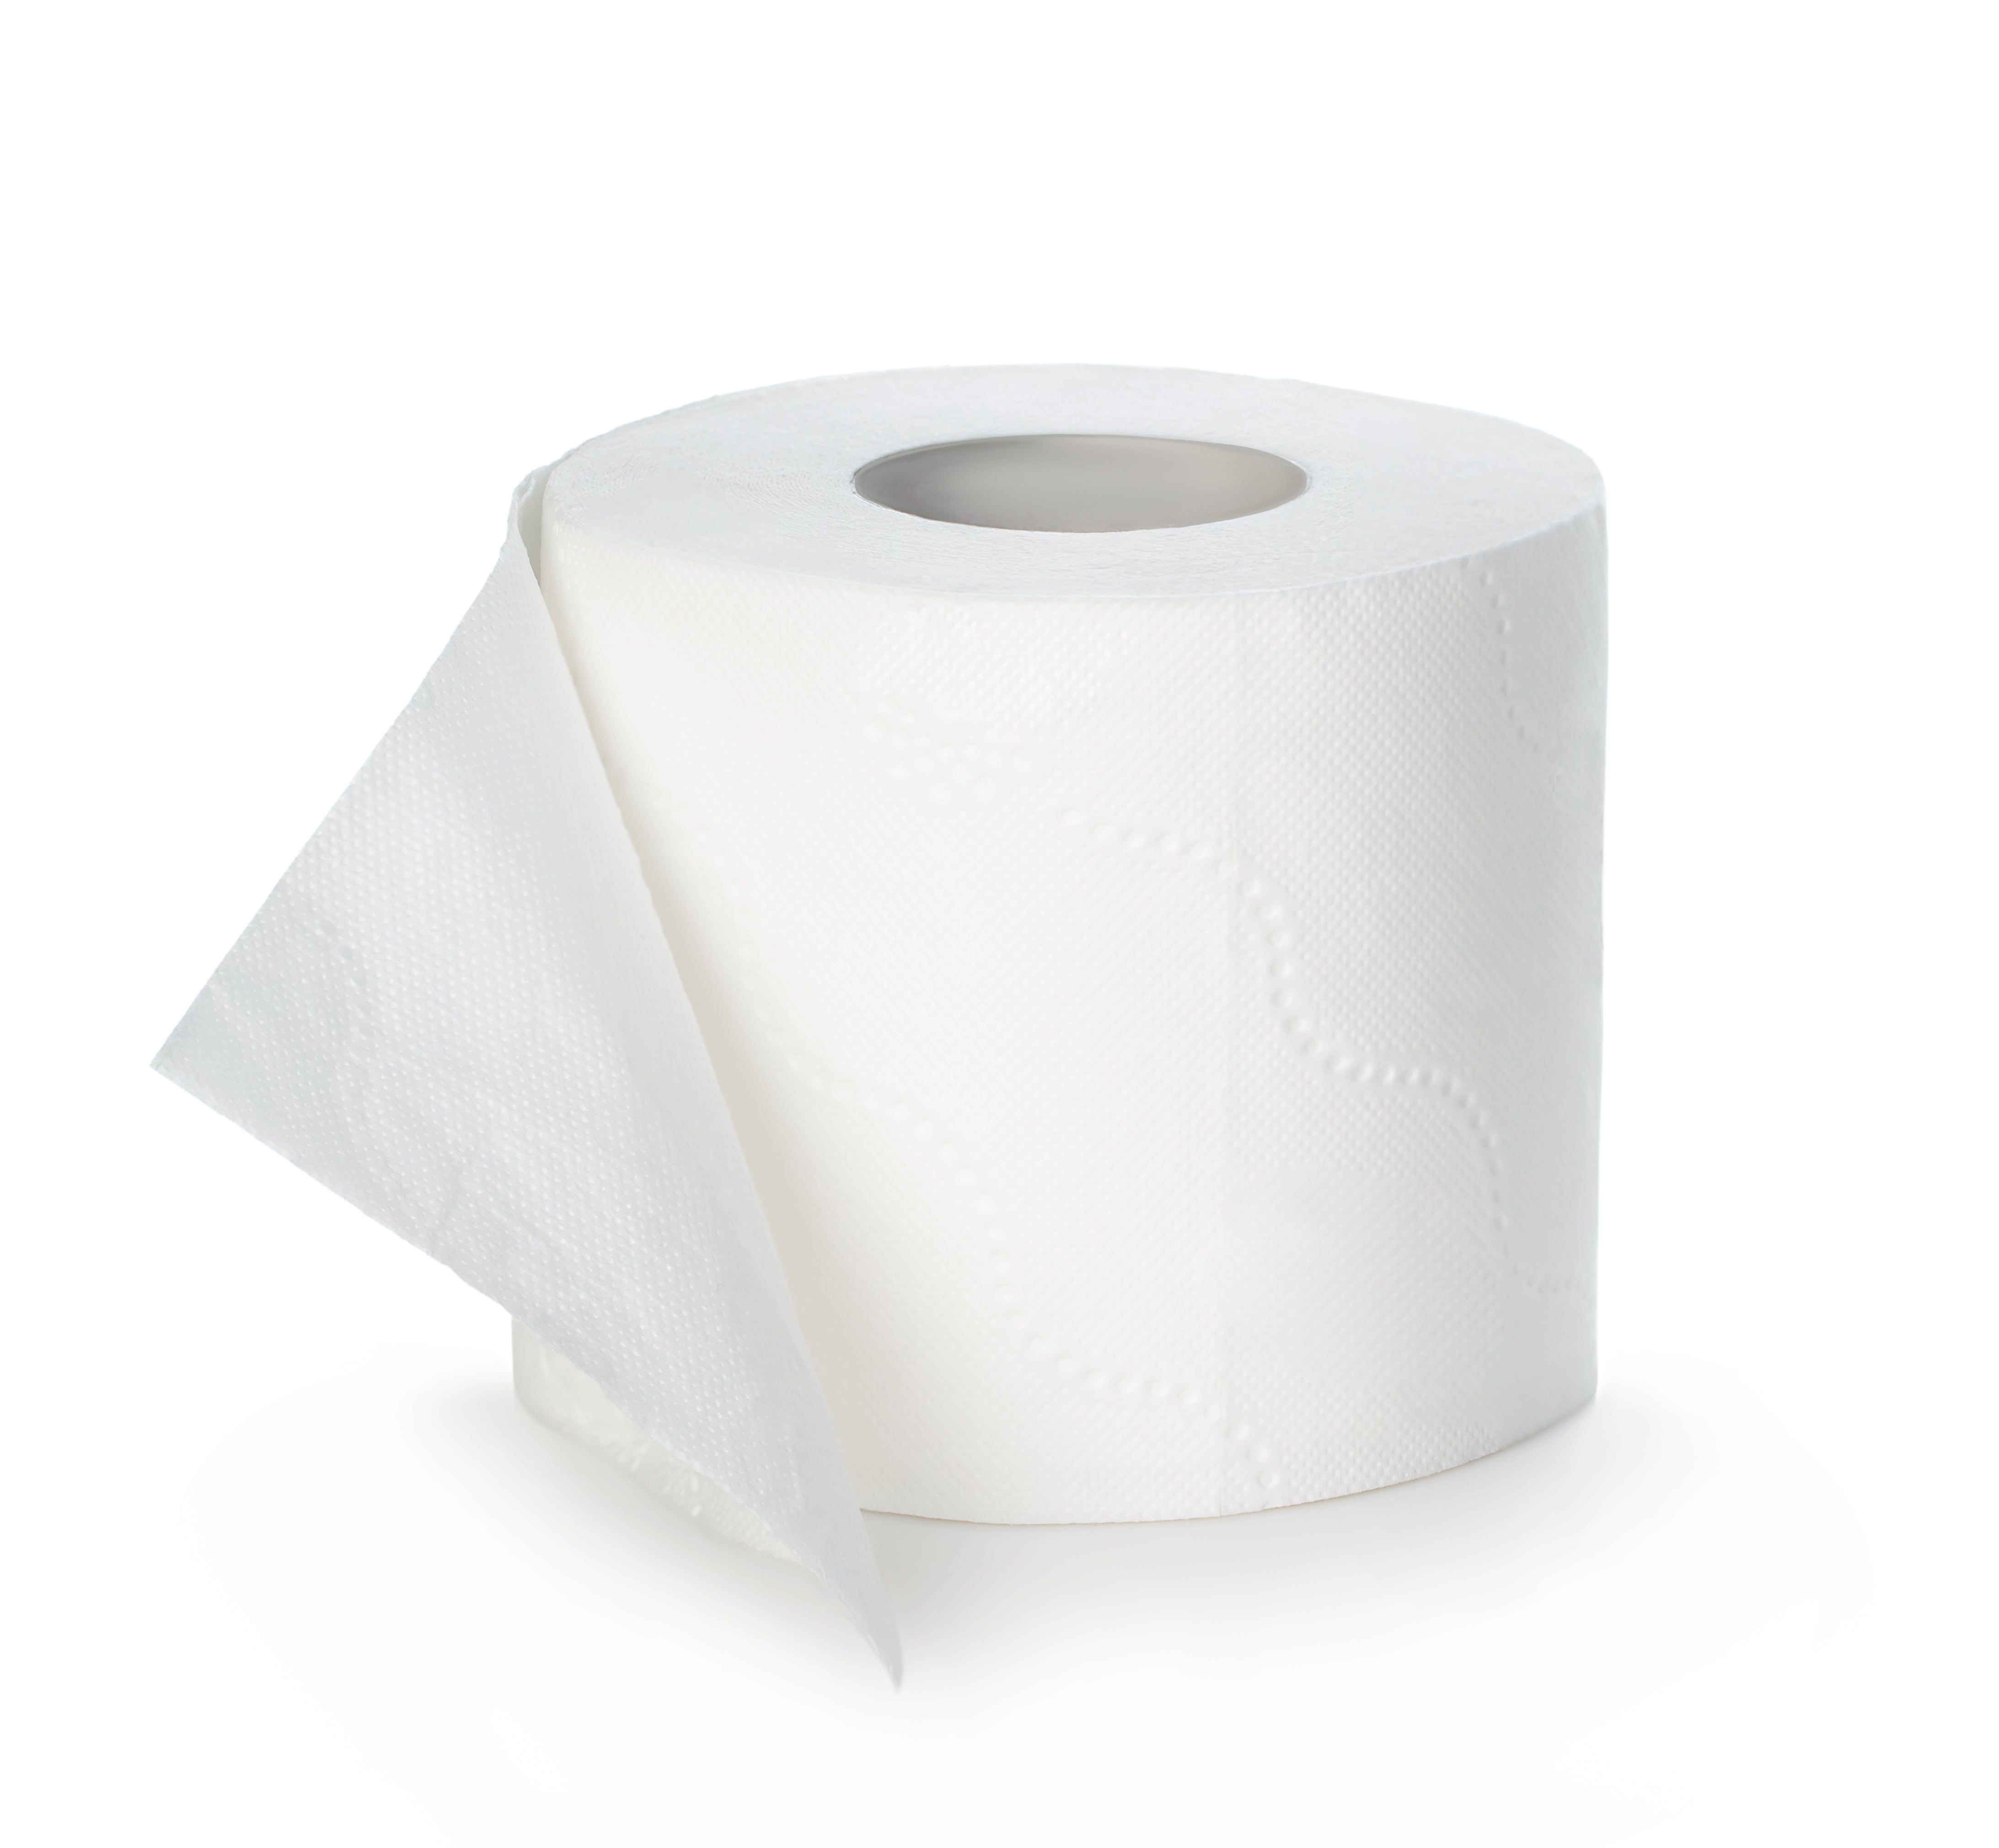 UK recycled toilet paper standing up on a white background 